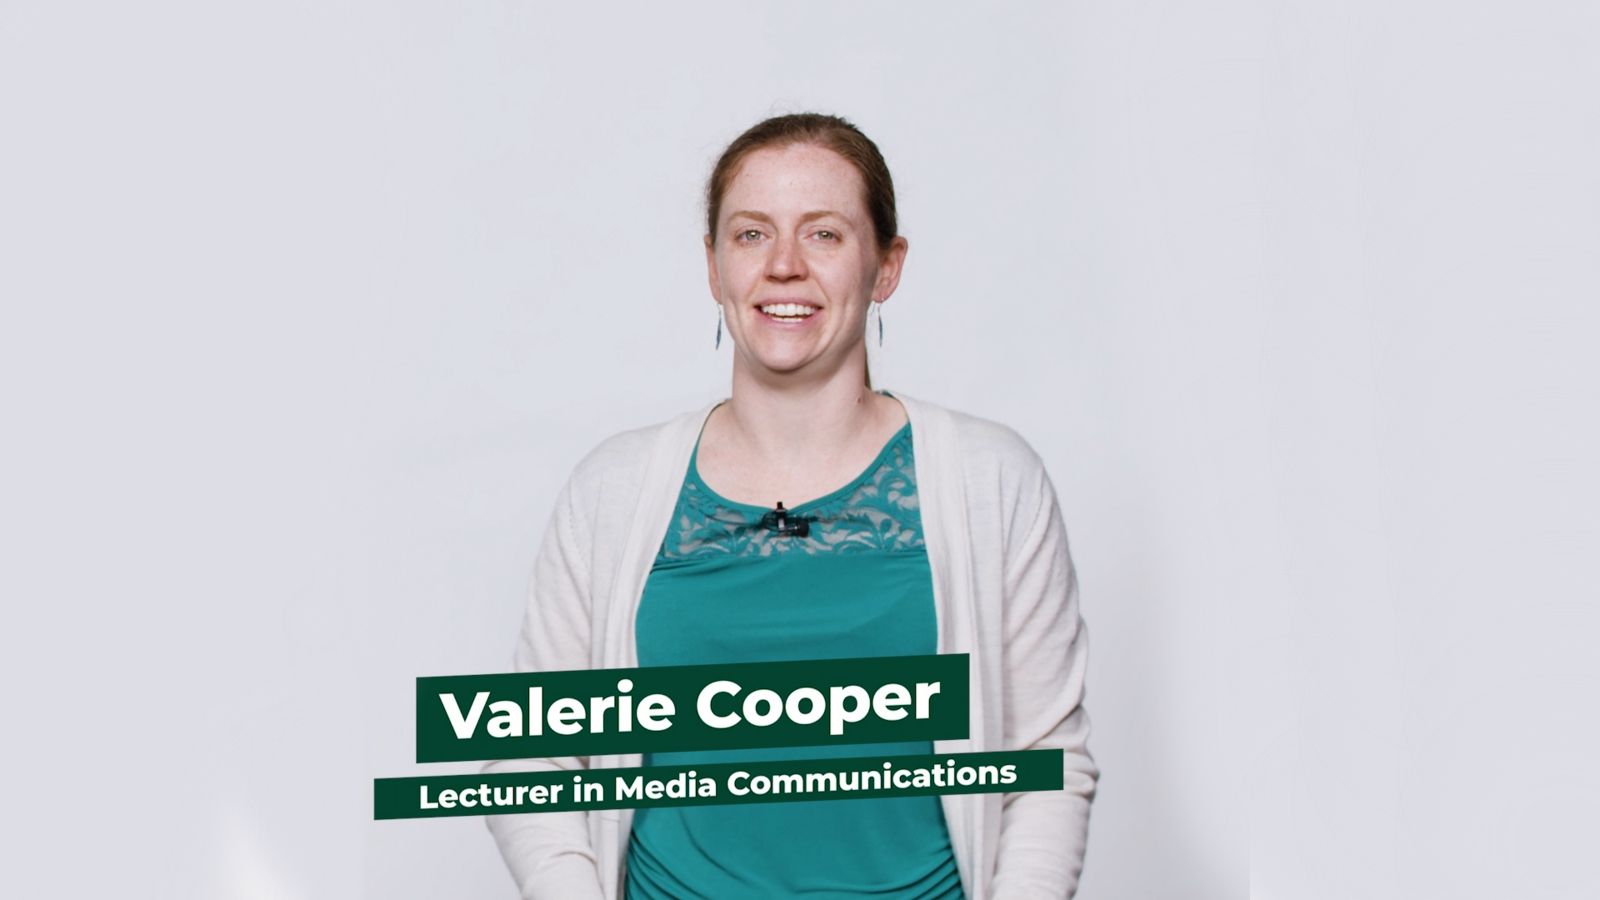 Dr Valerie Cooper stands facing the camera against a white backdrop